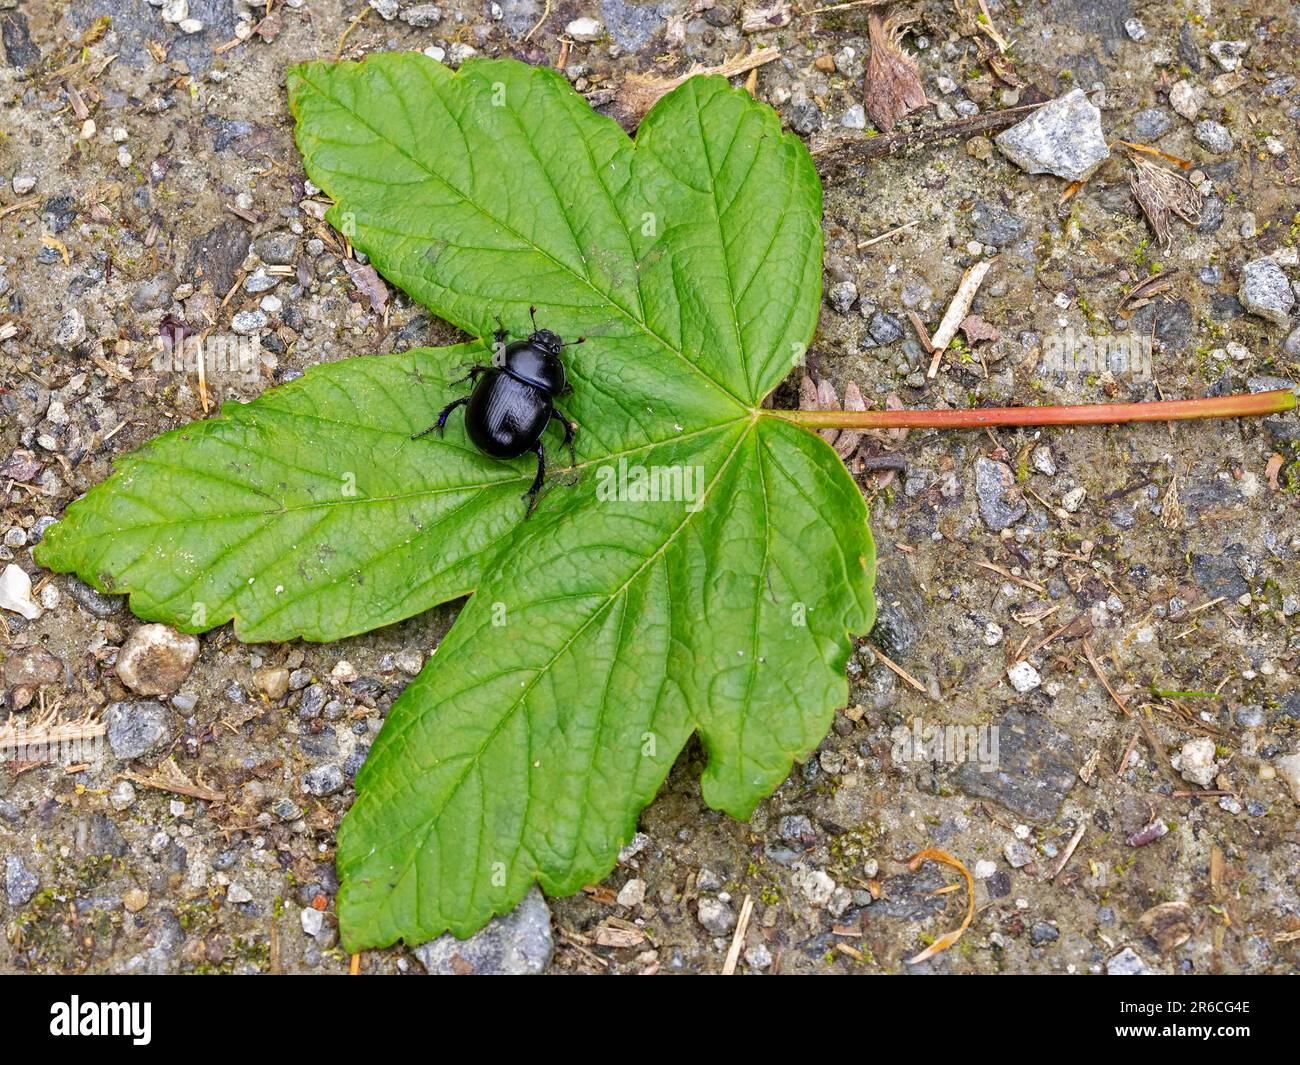 Black shiny dung beetle Geotrupes stercorarius on a green fallen maple leaf Stock Photo